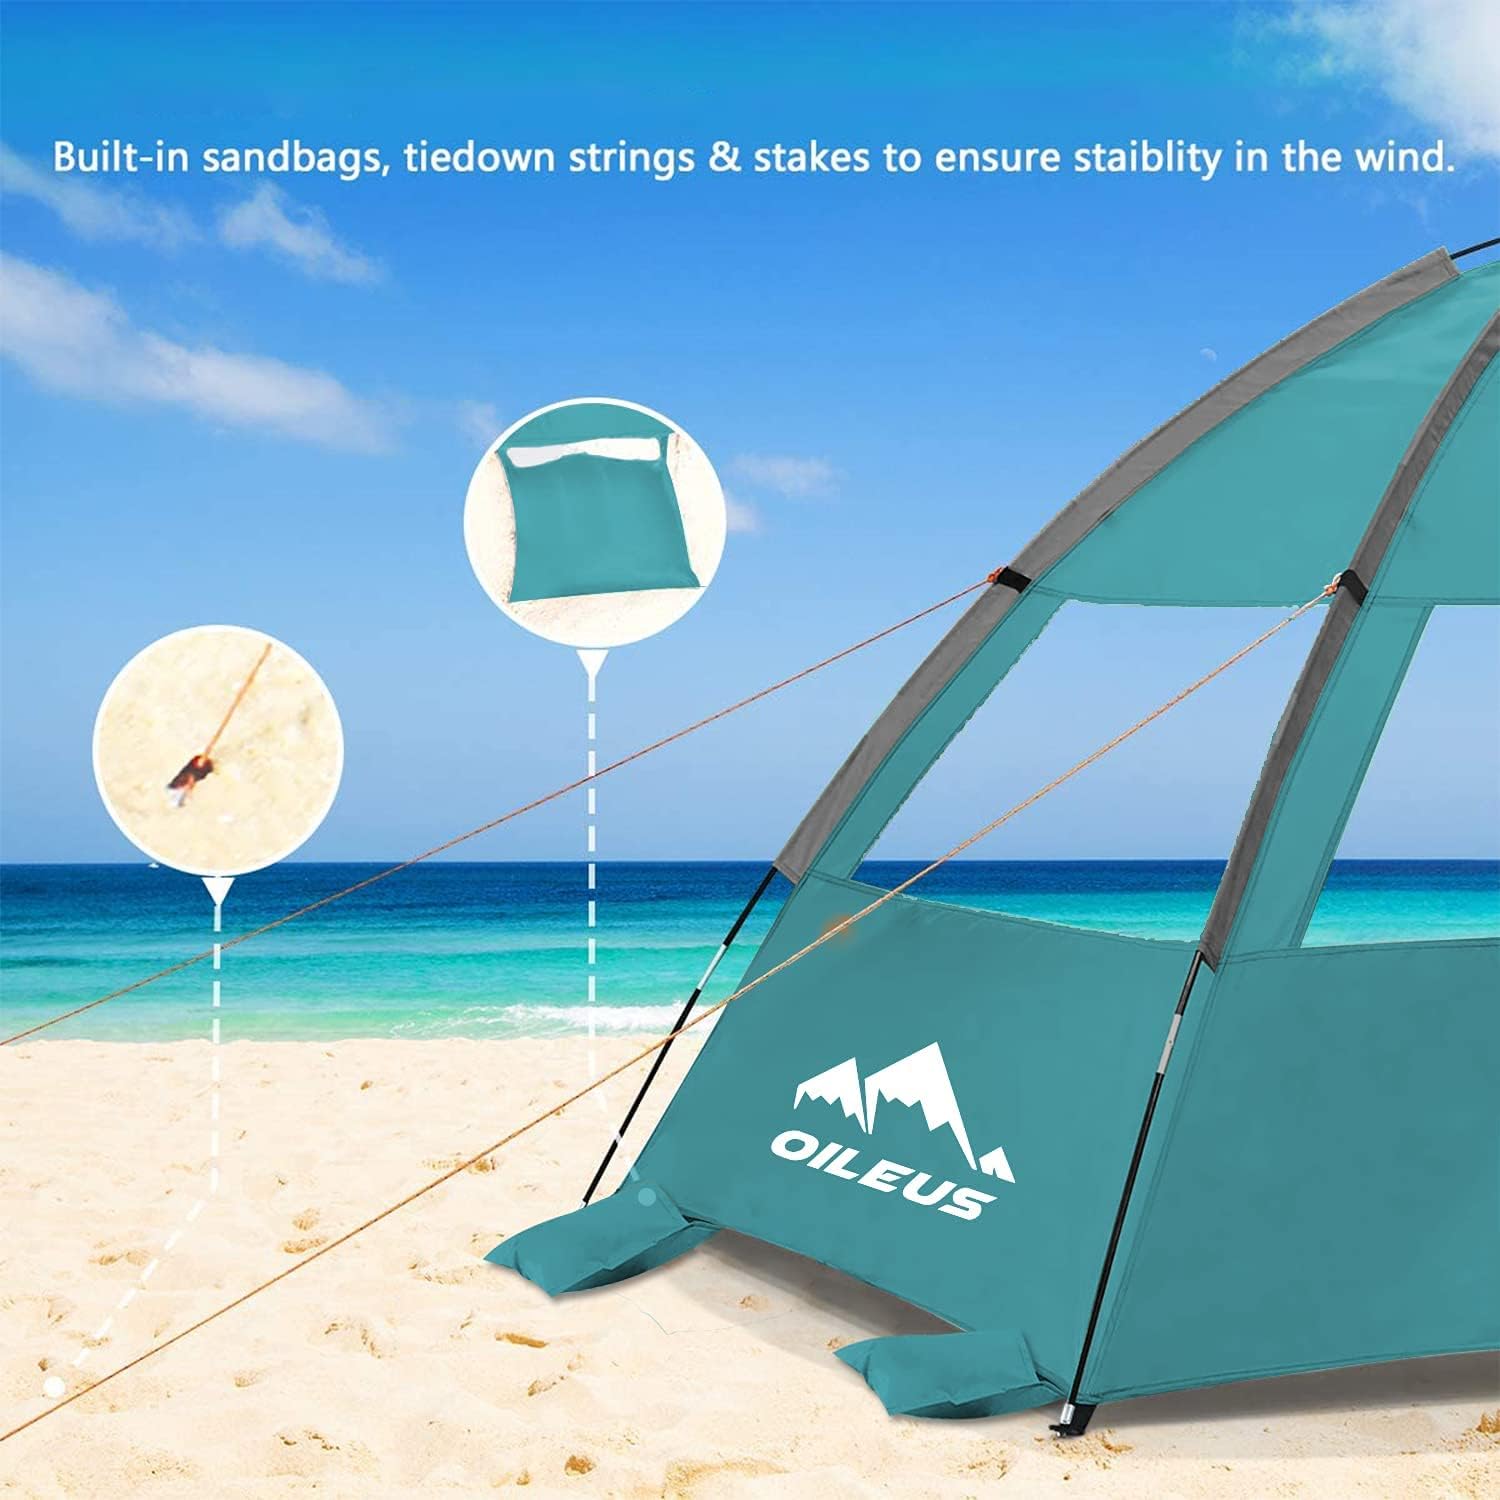 Oileus Beach Tent 2-3 Person Portable Sun Shade Shelter UV Protection, Extended Floor Ventilating Mesh Roll Up Windows Carrying Bag Stakes 6 Sand Pockets Fishing Hiking Camping,Blue